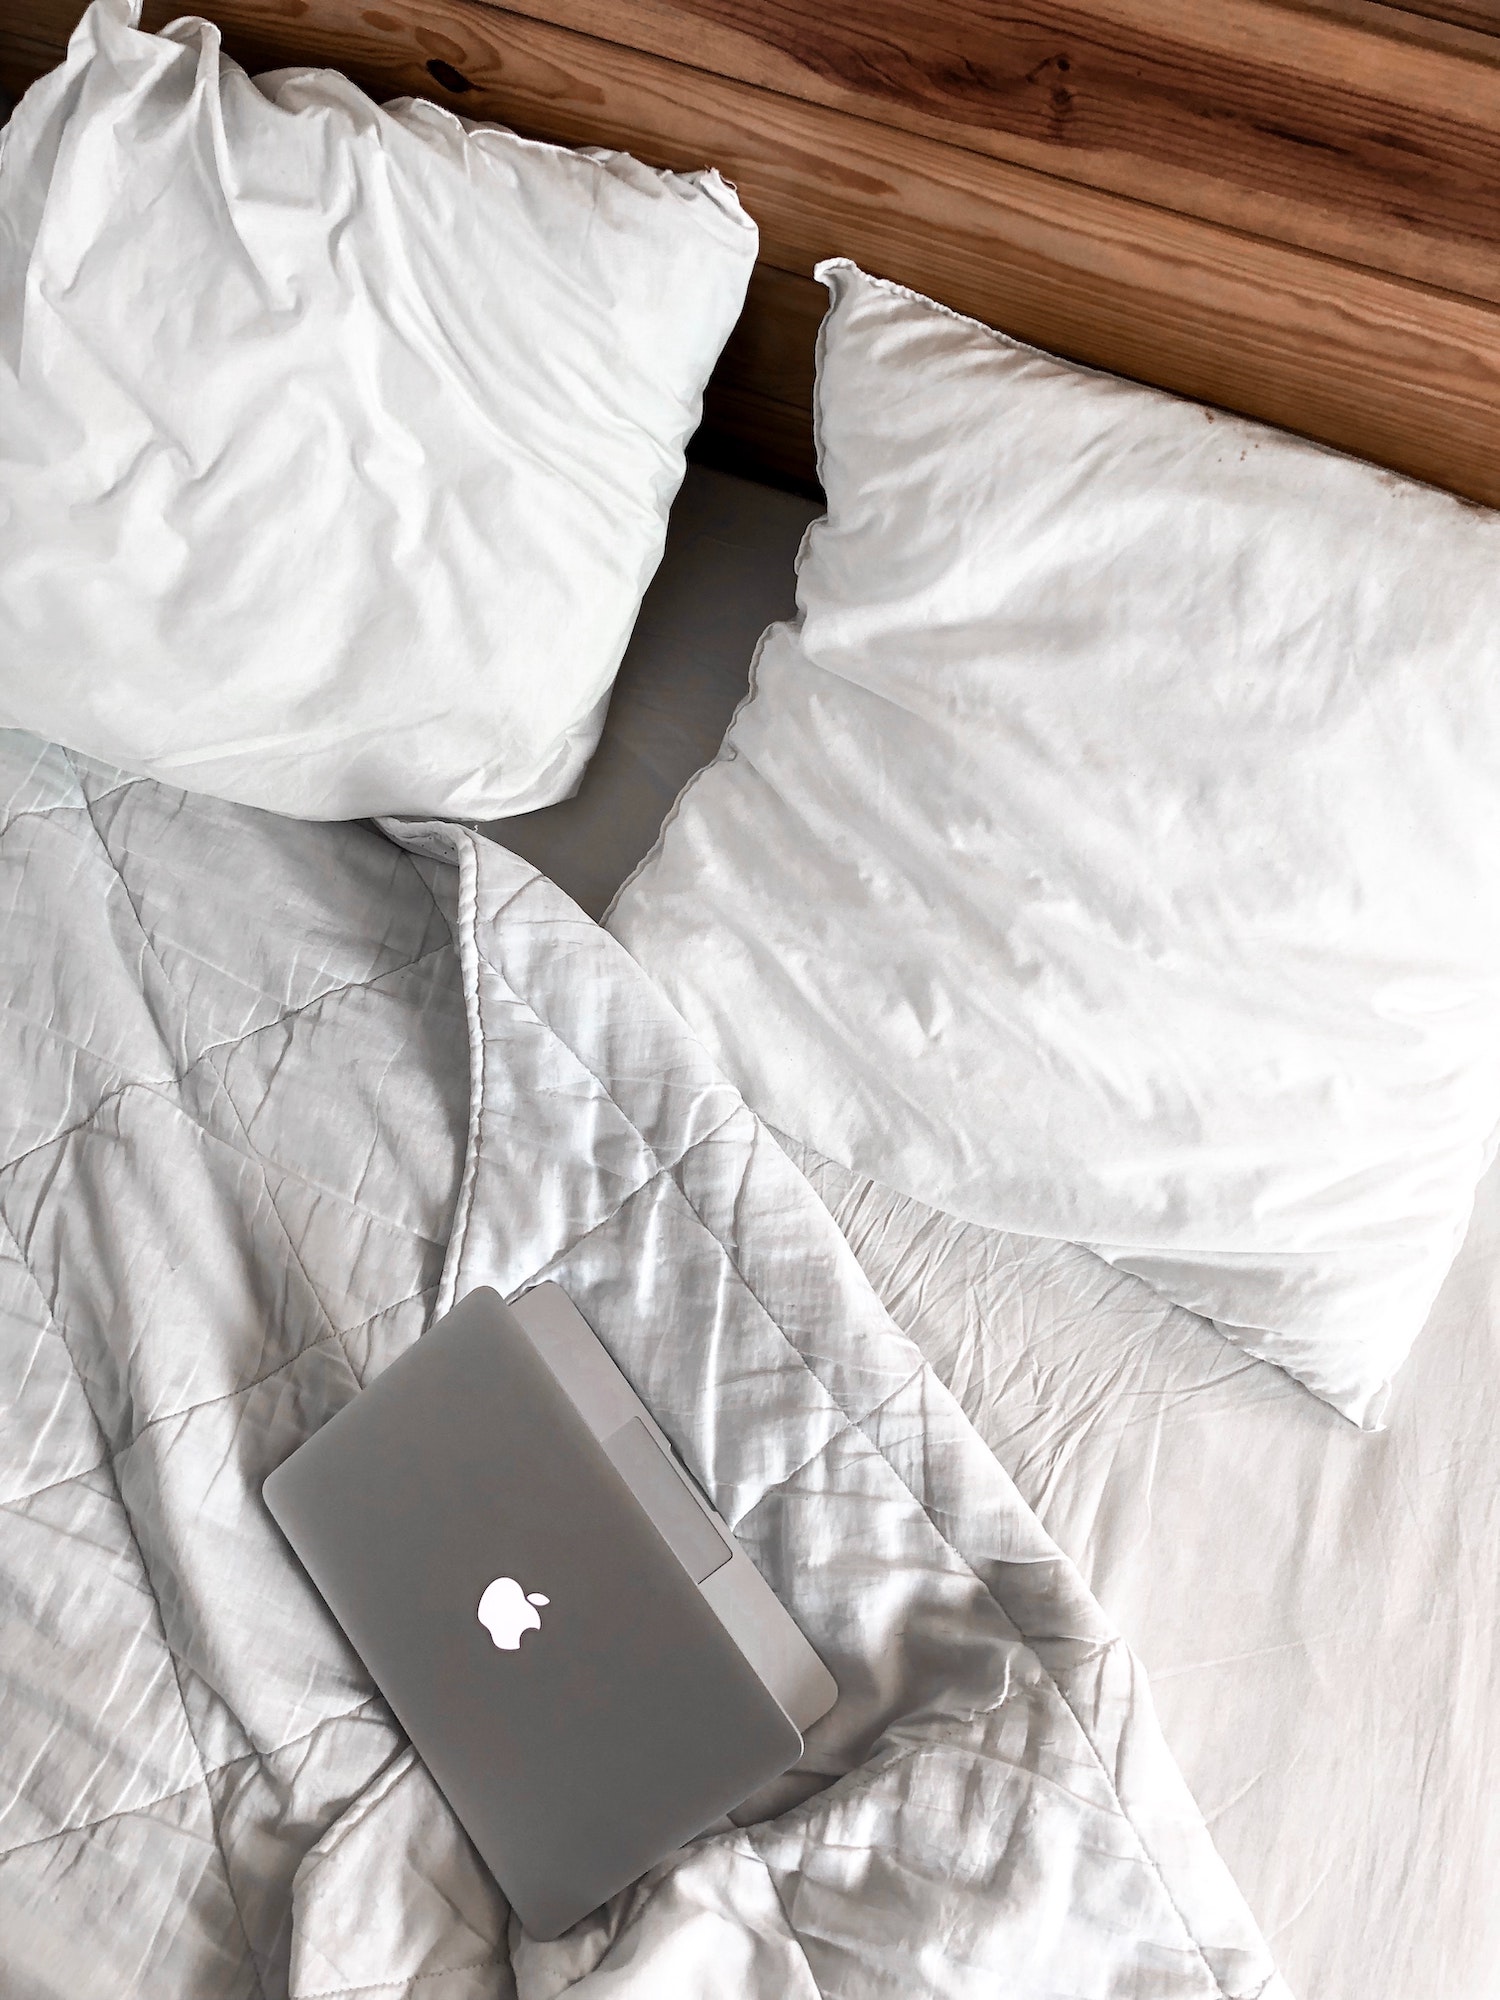 Bedbugs Macbook on bed | 6 Ways How You Can Get Rid Of Acid Reflux Quickly | Fast Health Tips | Elle Blonde Luxury Lifestyle Destination Blog